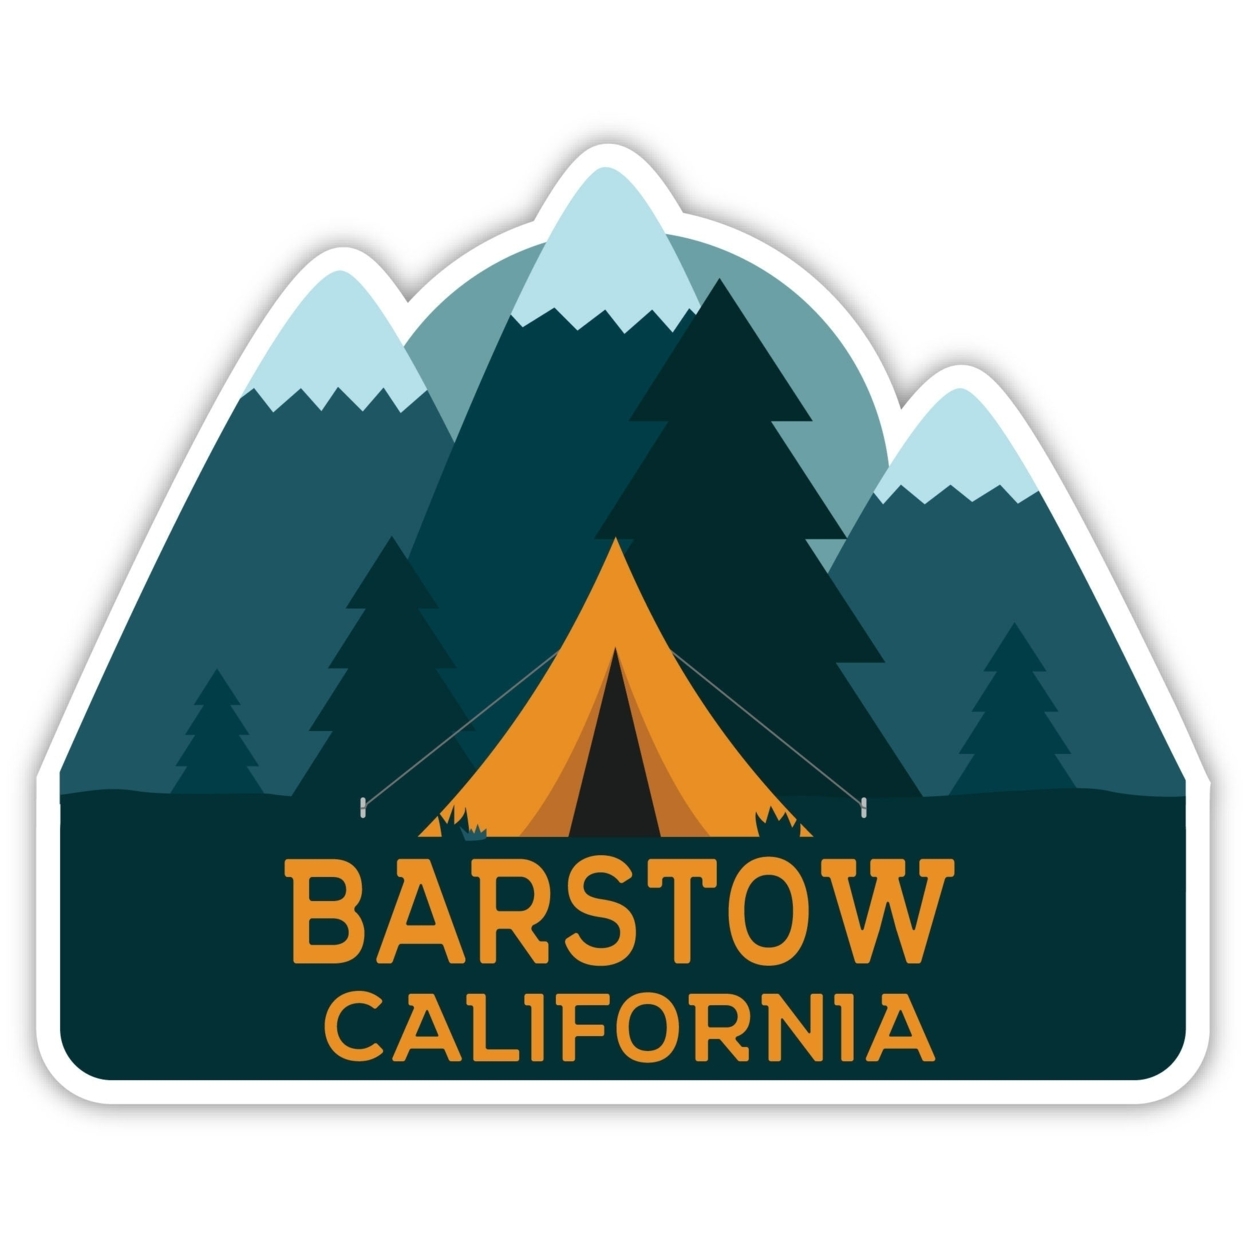 Barstow California Souvenir Decorative Stickers (Choose Theme And Size) - Single Unit, 8-Inch, Camp Life